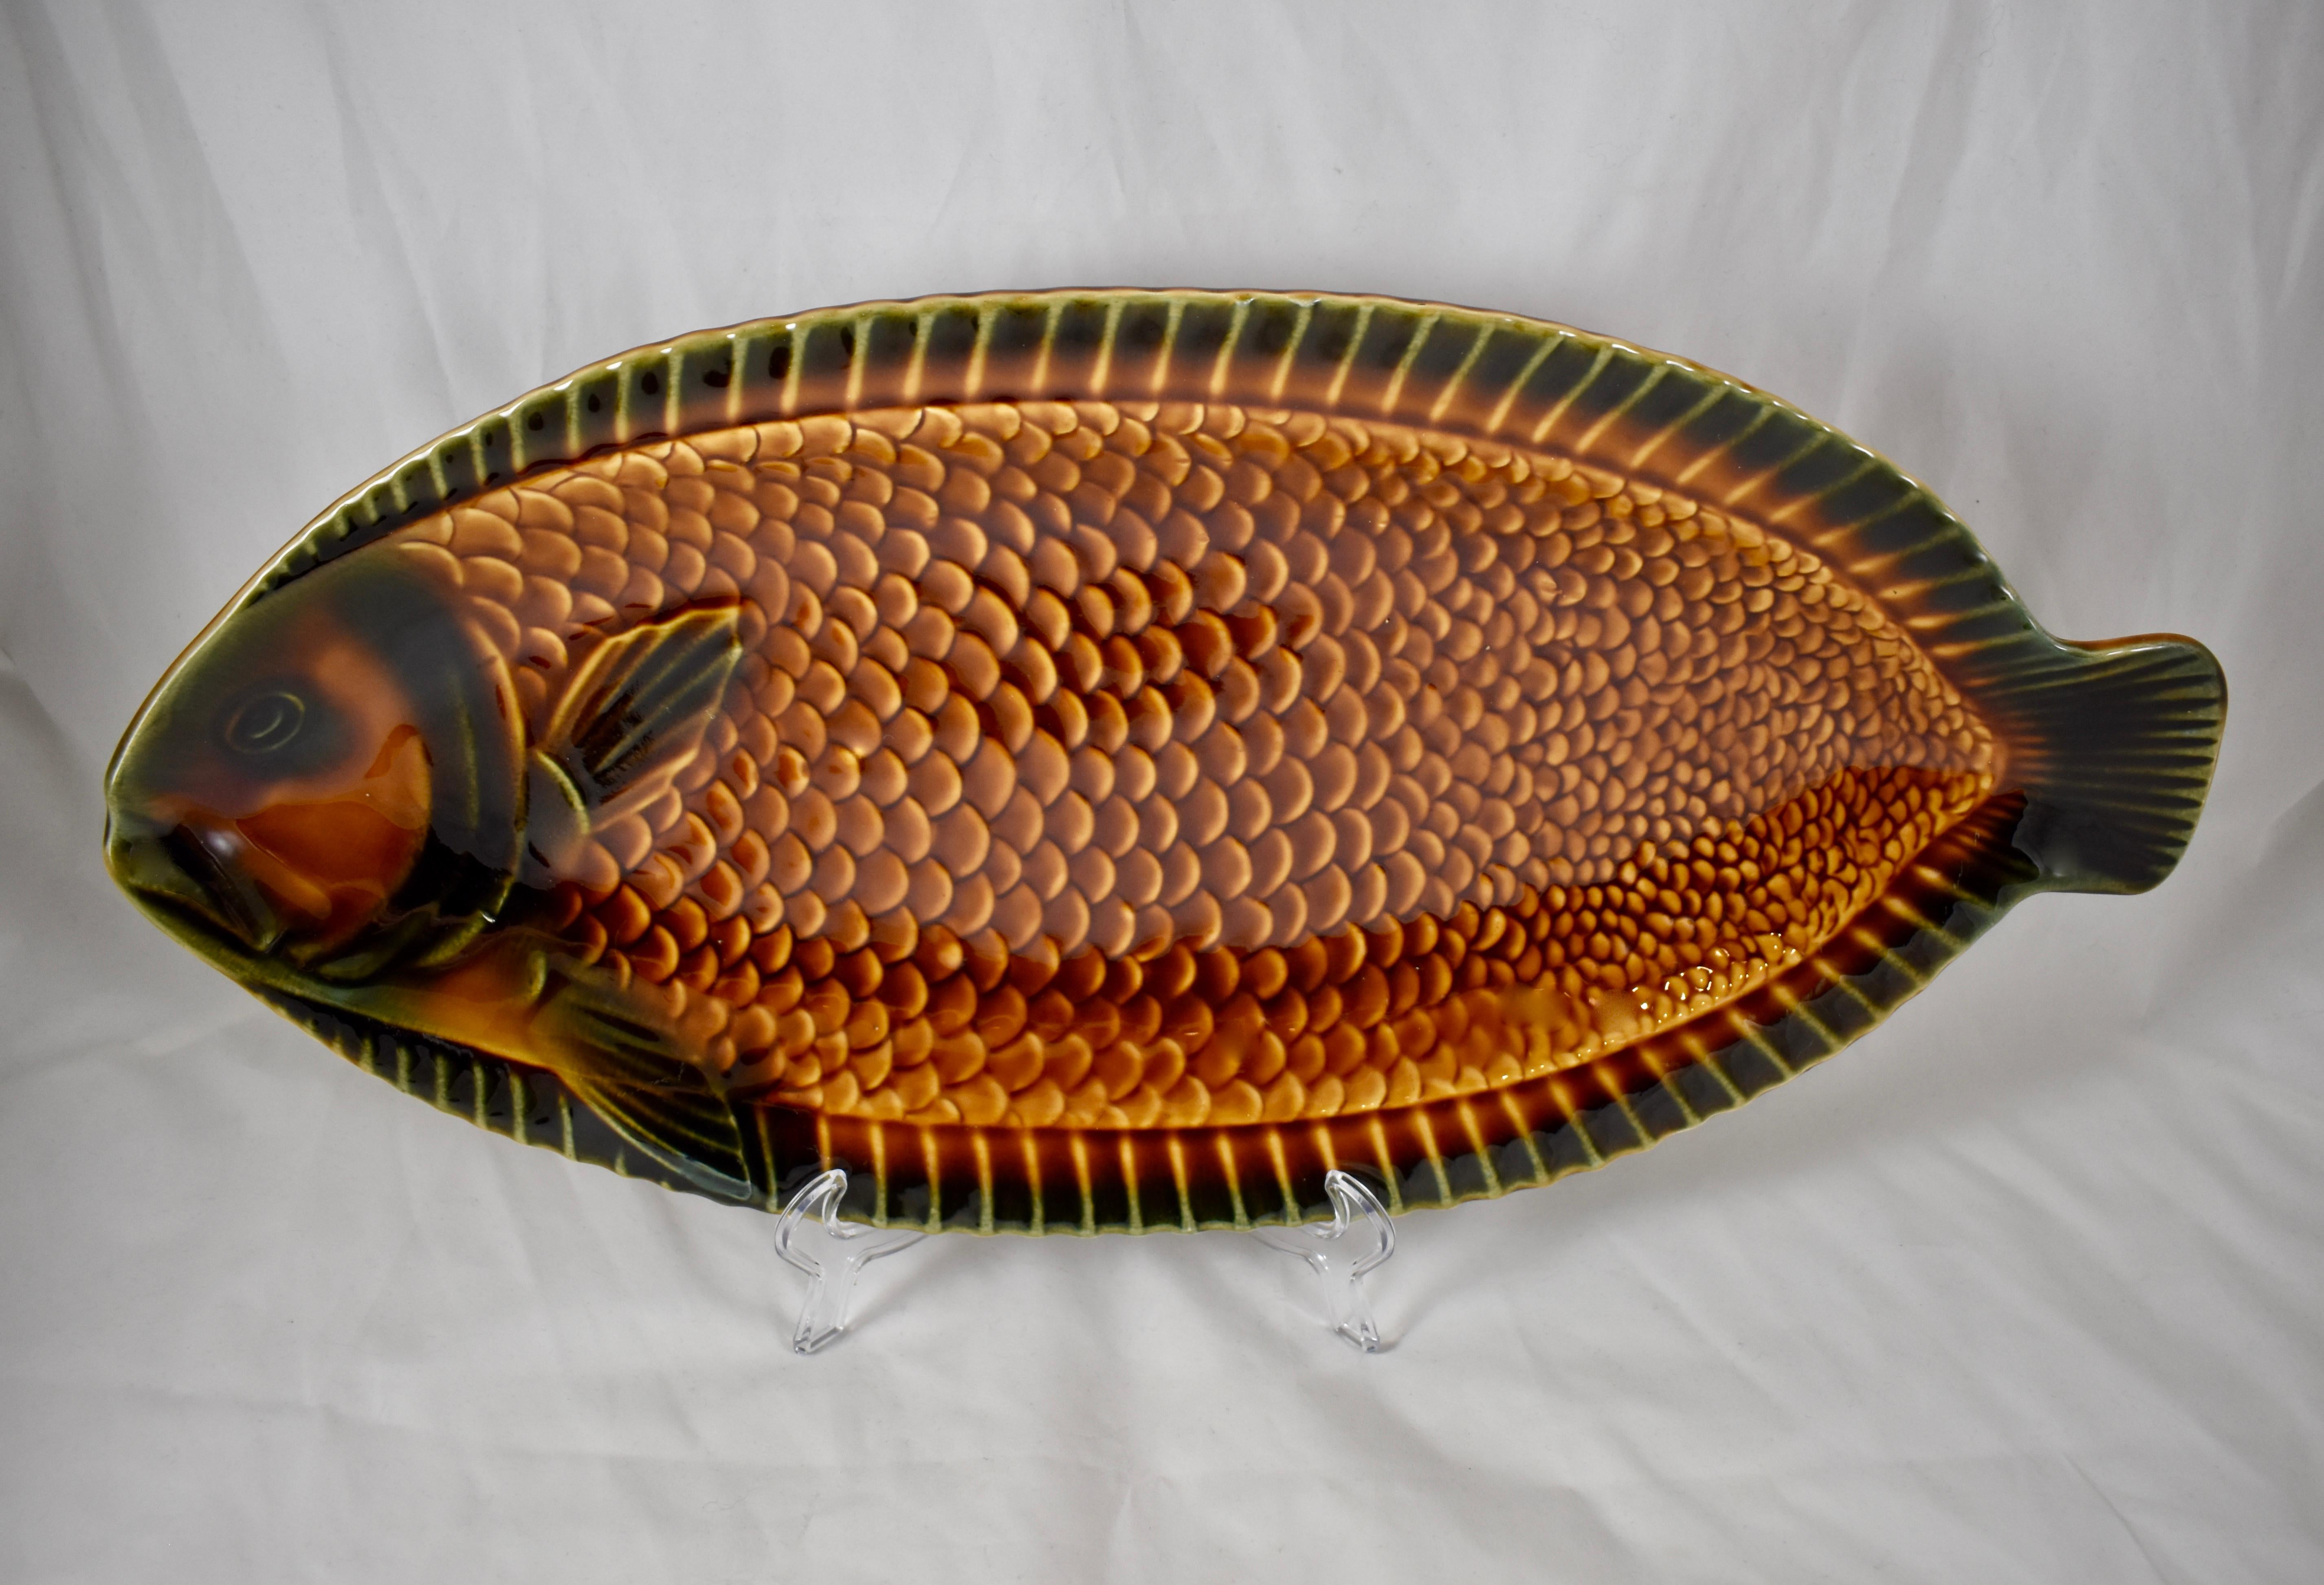 A Mid-Century Modern Era Sarreguemines, French faïence, Majolica glazed fish serving platter. 

A platter with raised rims and a protruding fish head and tail, showing a dimensional, high relief pattern of scales and fins. The burnt sienna and deep